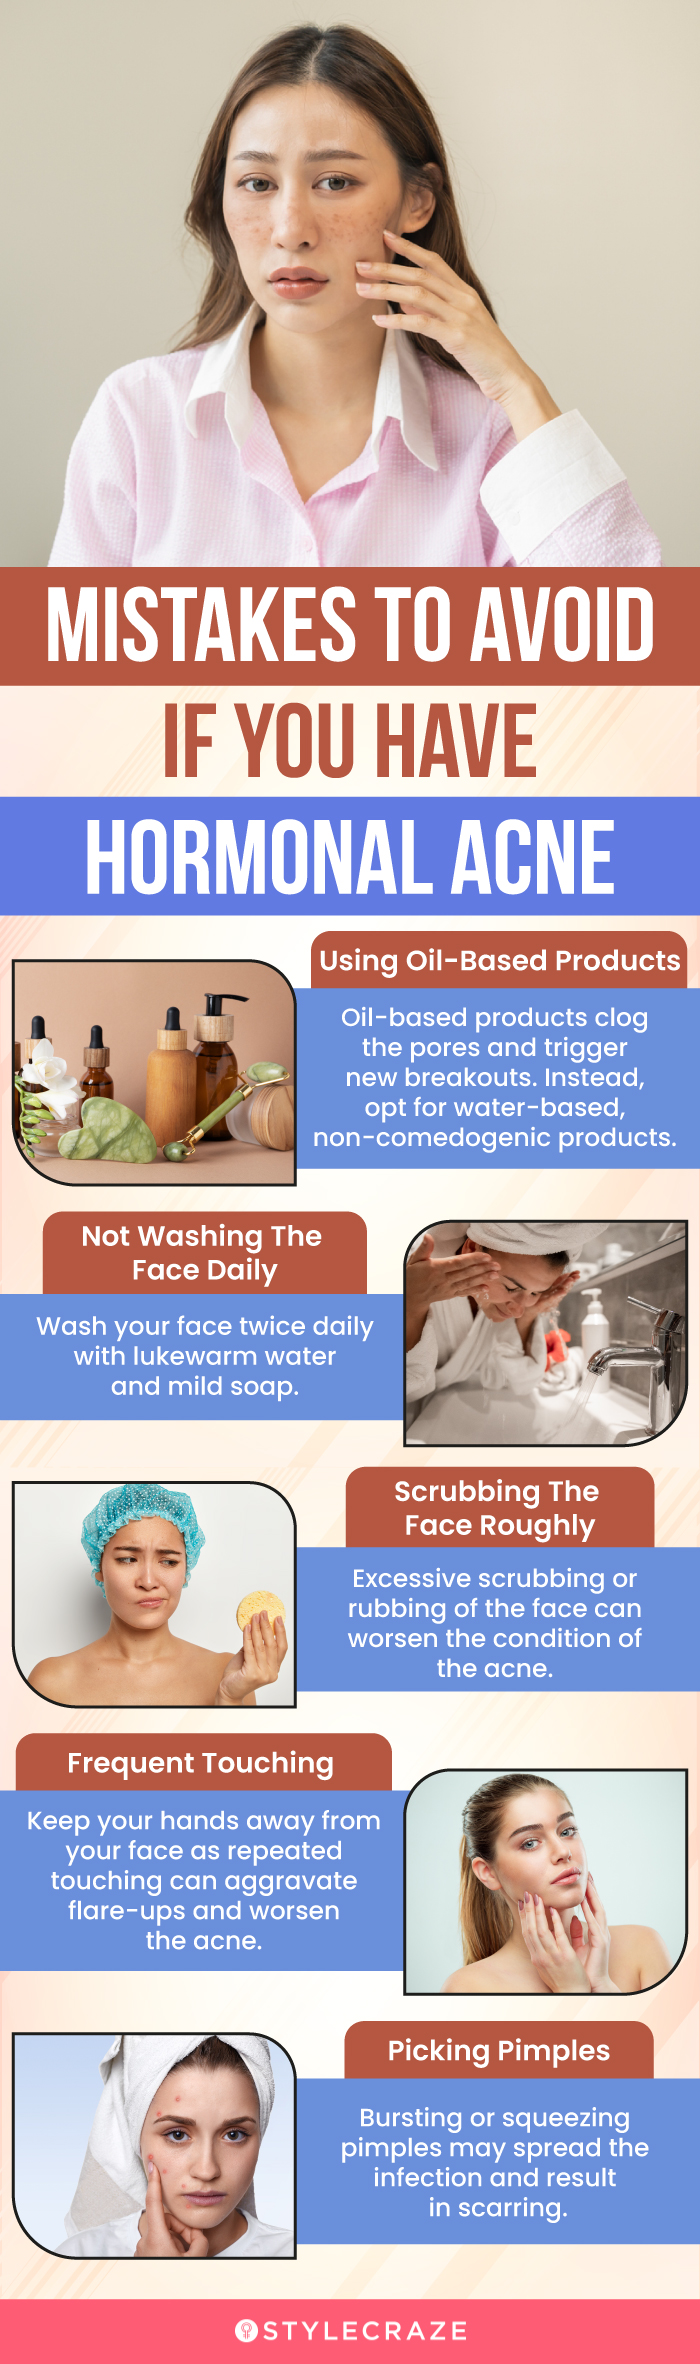 Mistakes To Avoid For Hormonal Acne (infographic)